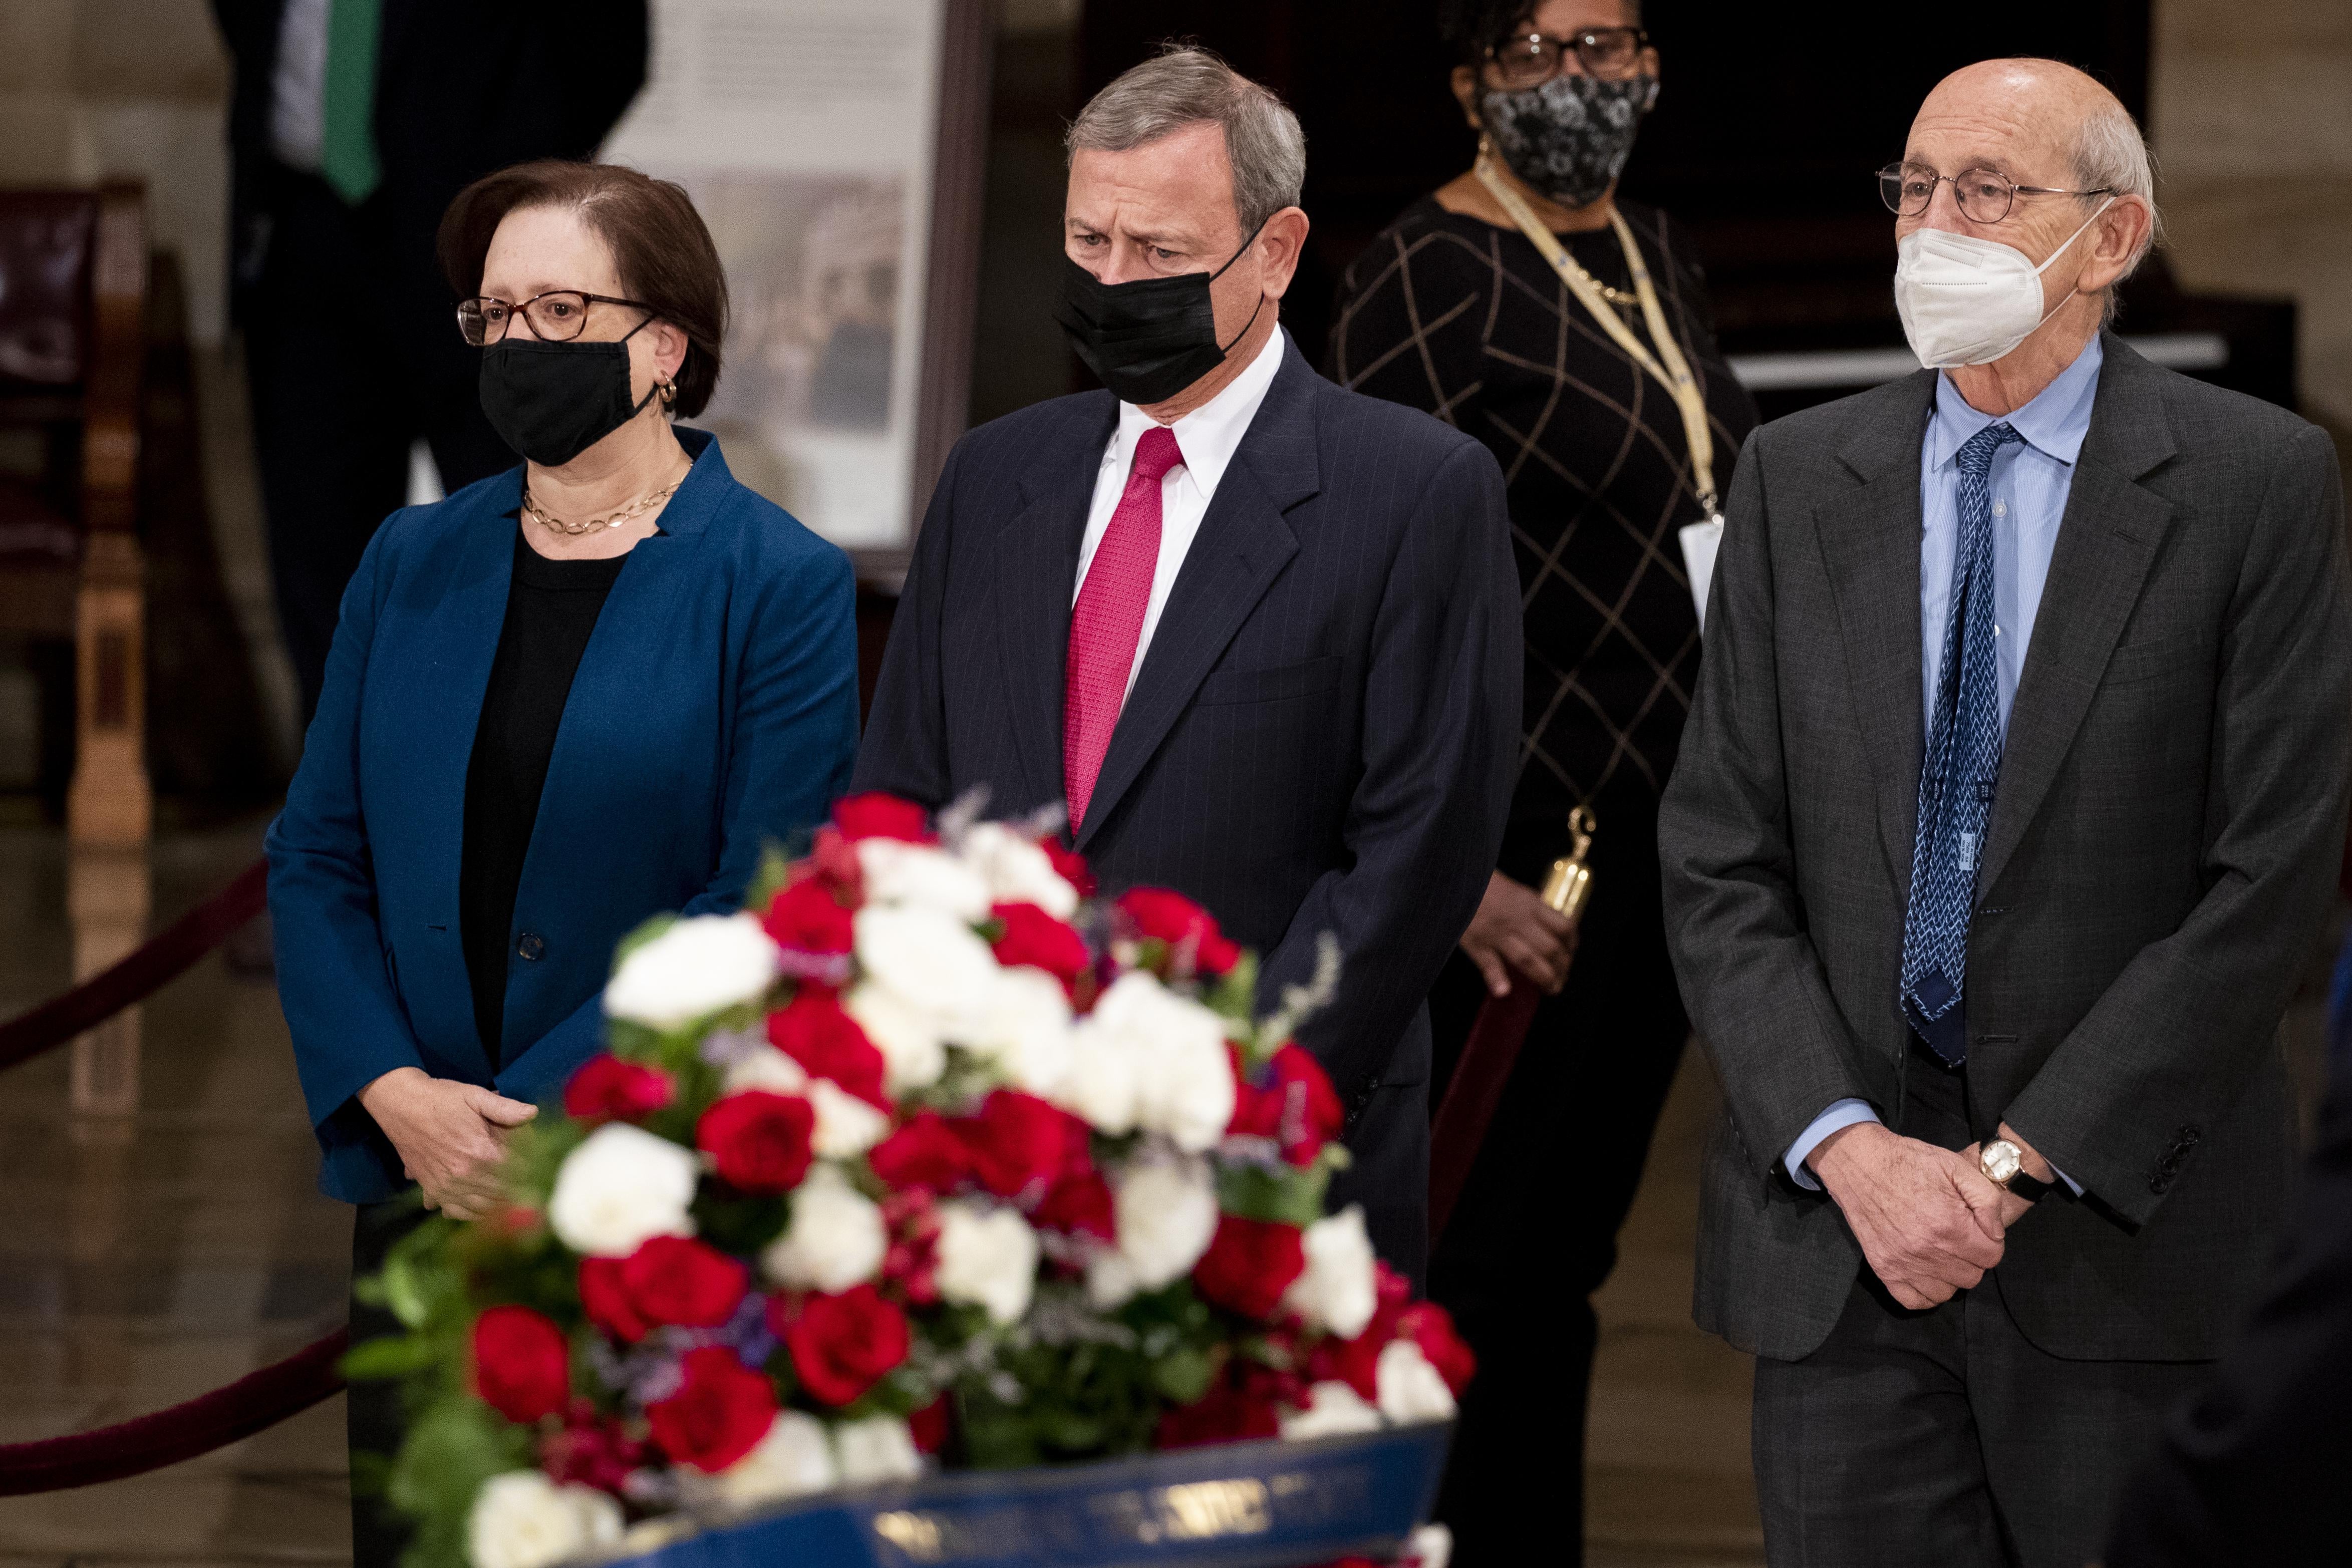 The three justices standing side by side with their arms clasped in front of themselves, standing in front of flowers and the casket of Bob Dole, which is out of the shot.